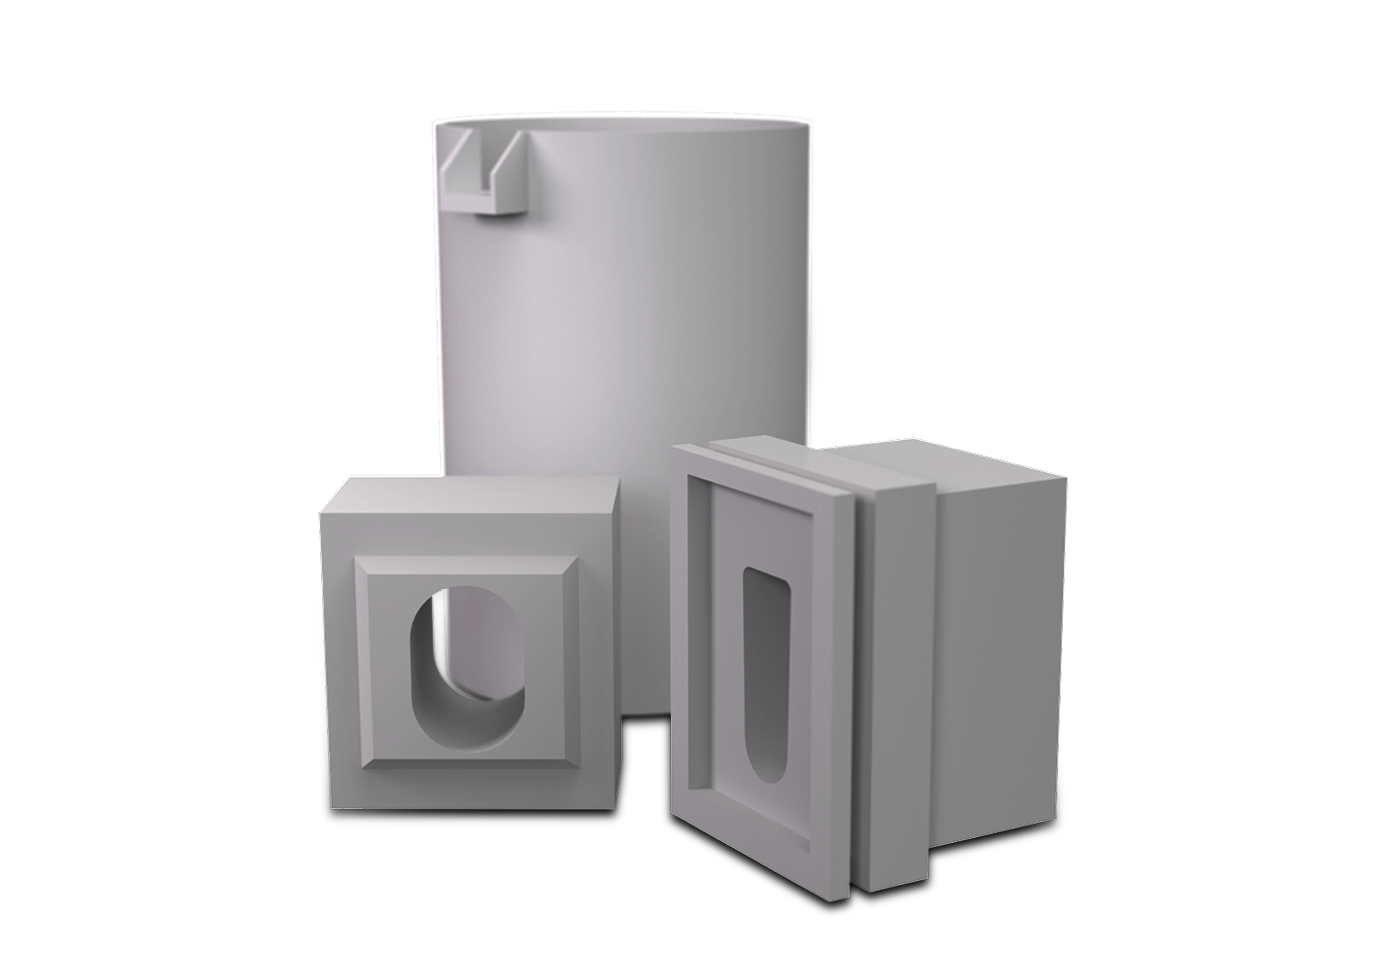 Other refractory parts